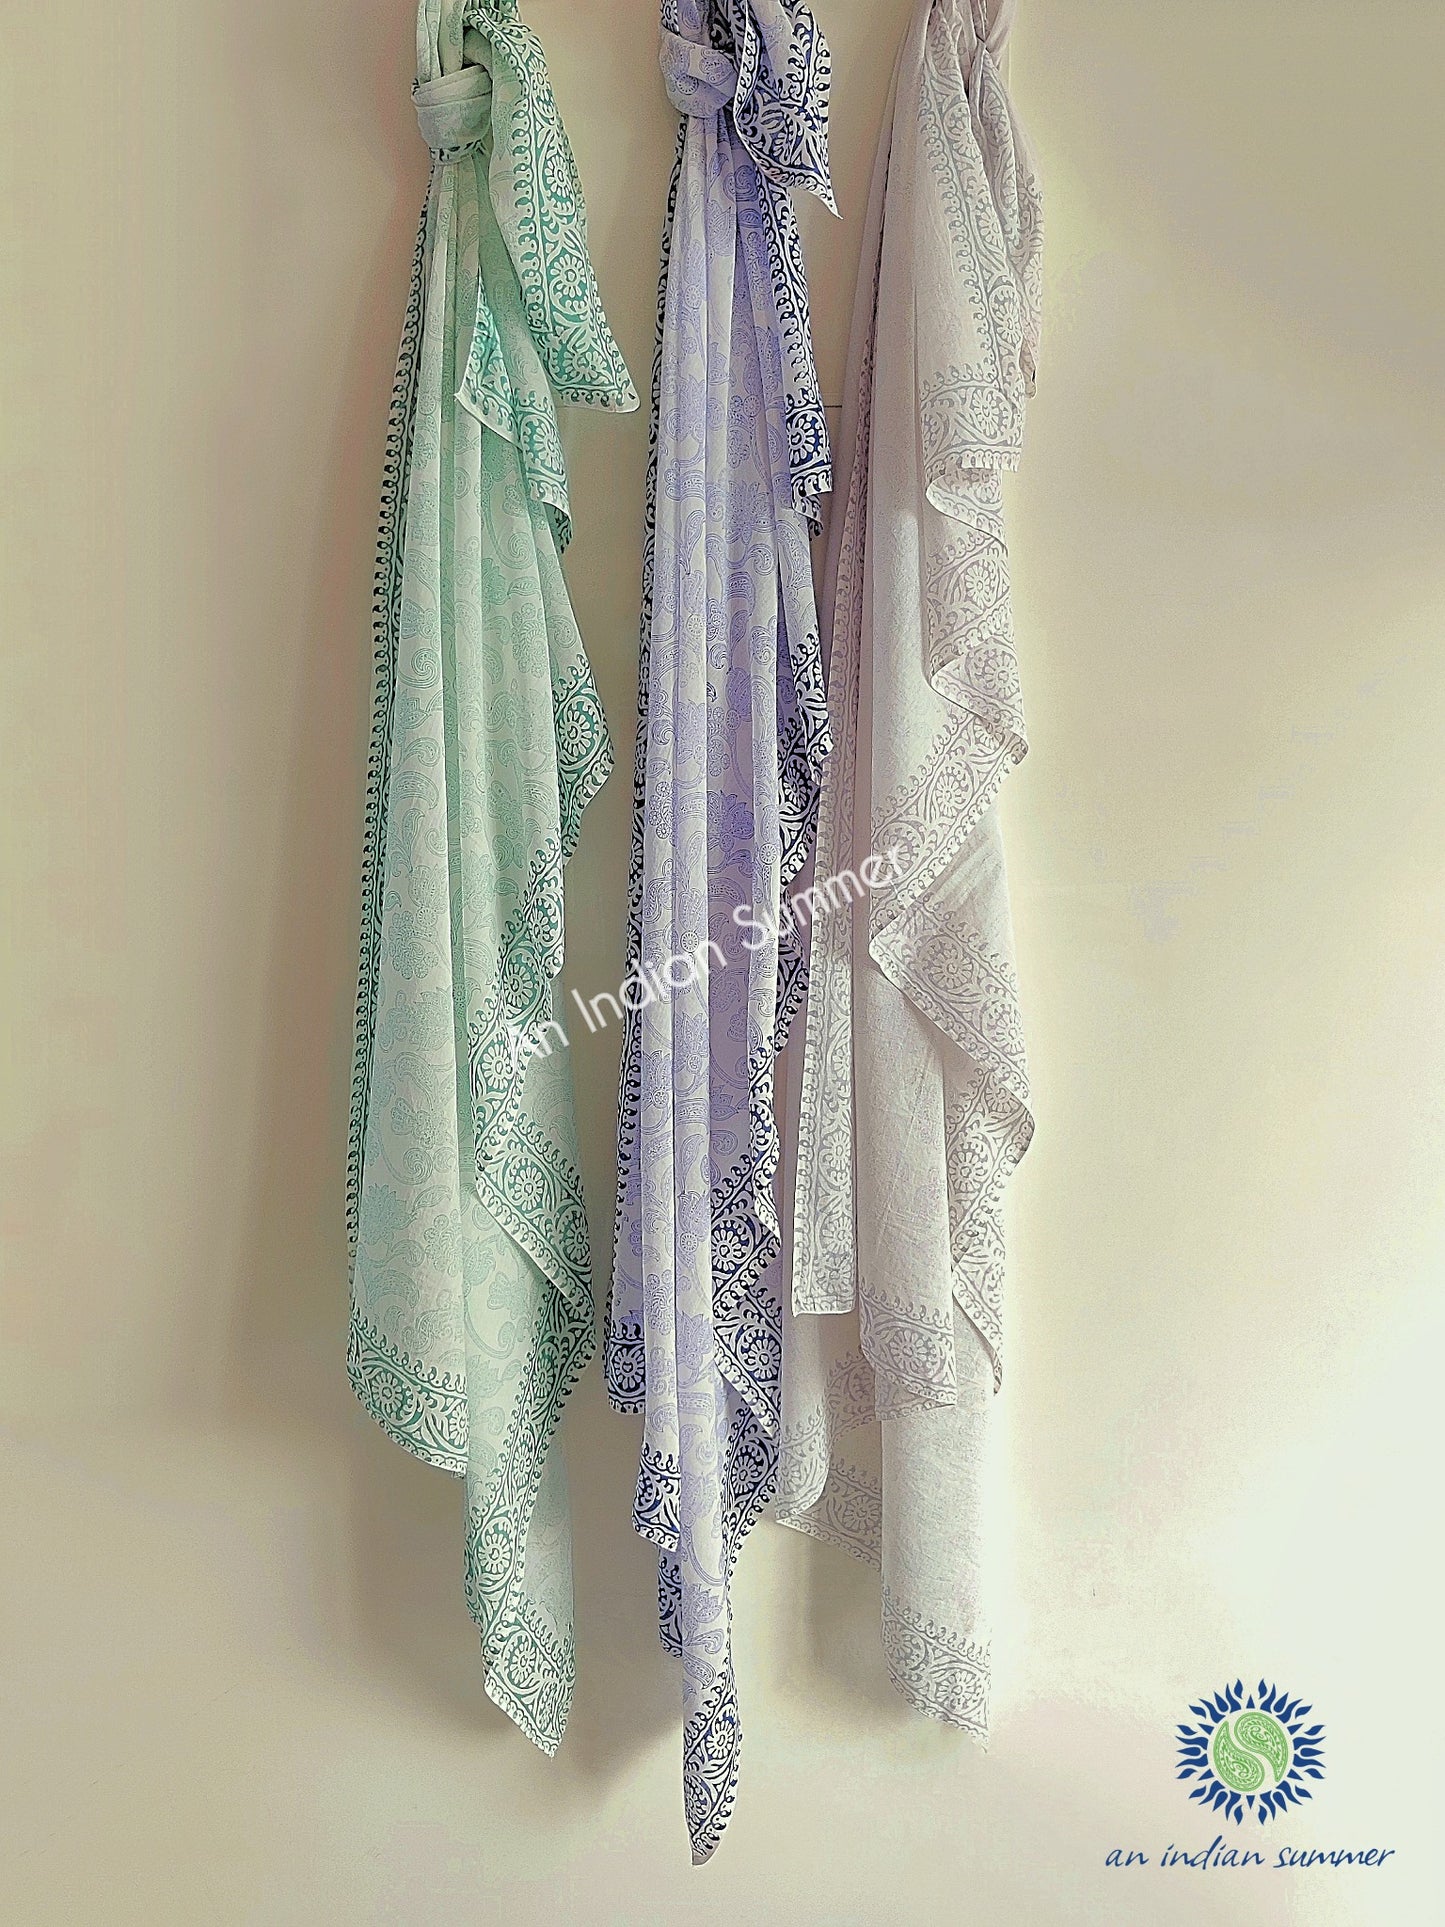 Paisley Sarongs Pareos | Green Blue Grey | Hand Block Printed | Hand Block Printed | Cotton Voile | An Indian Summer | Seasonless Timeless Sustainable Ethical Authentic Artisan Conscious Clothing Lifestyle Brand